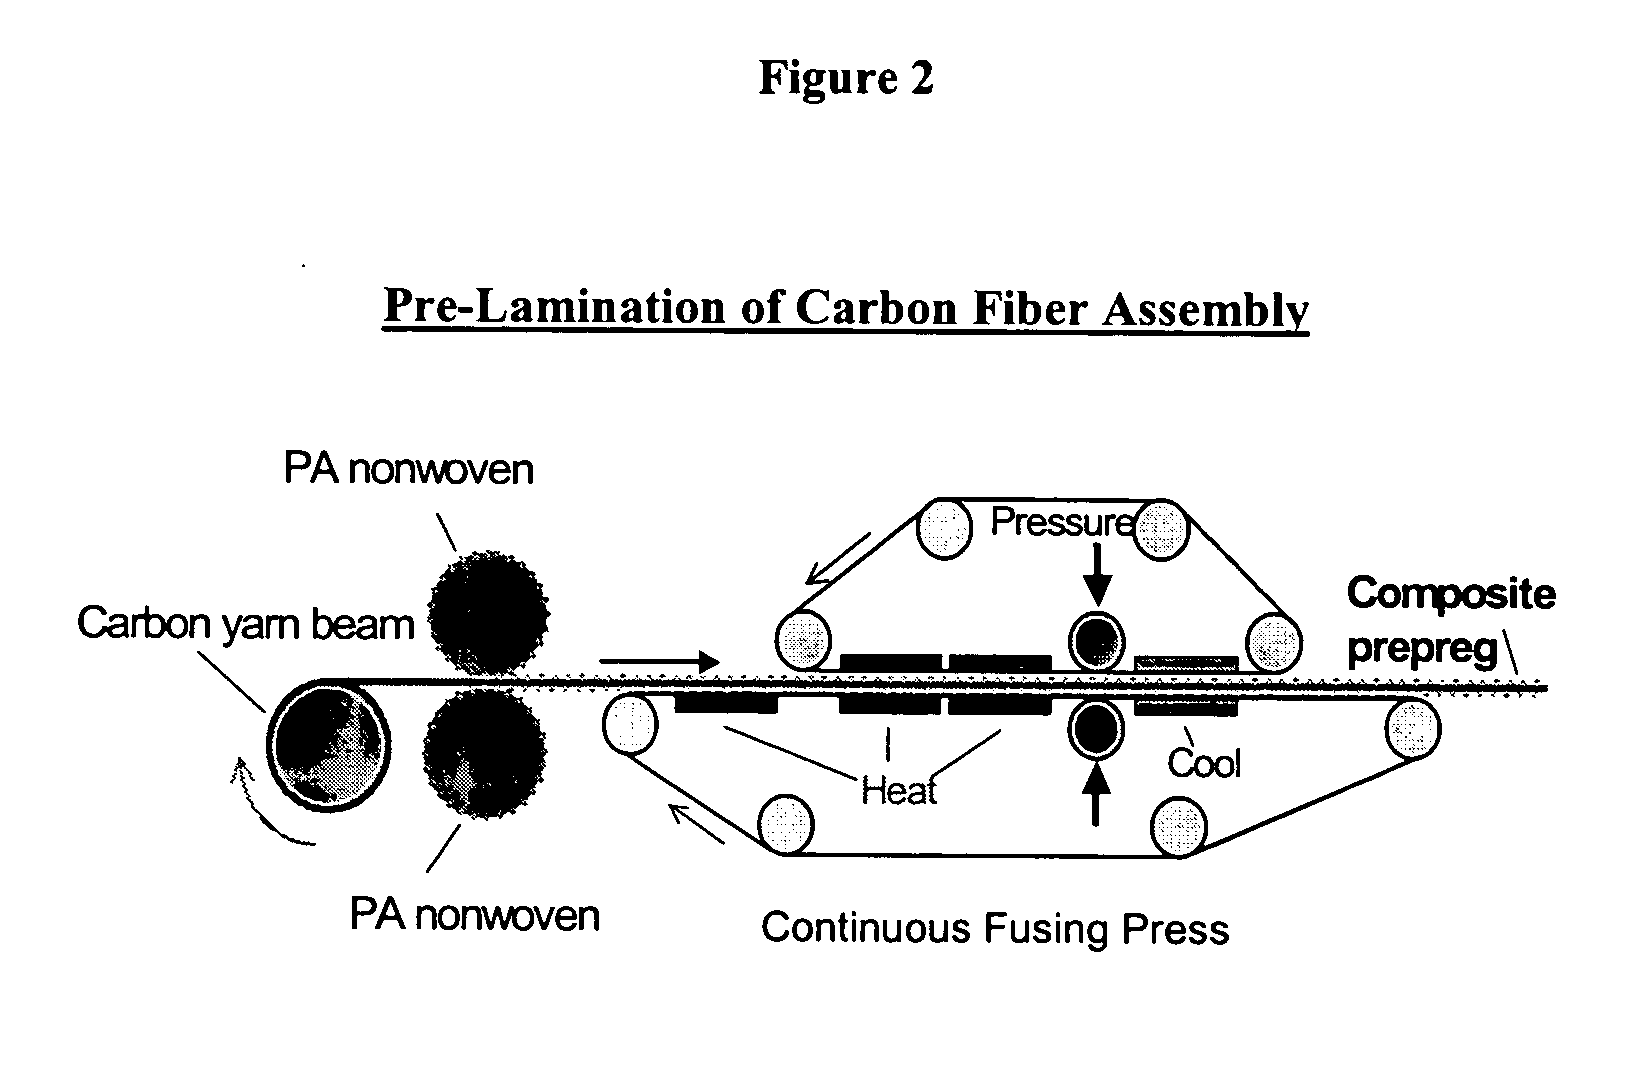 Thermoplastic nylon adhesive matrix having a uniform thickness and composite laminates formed therefrom